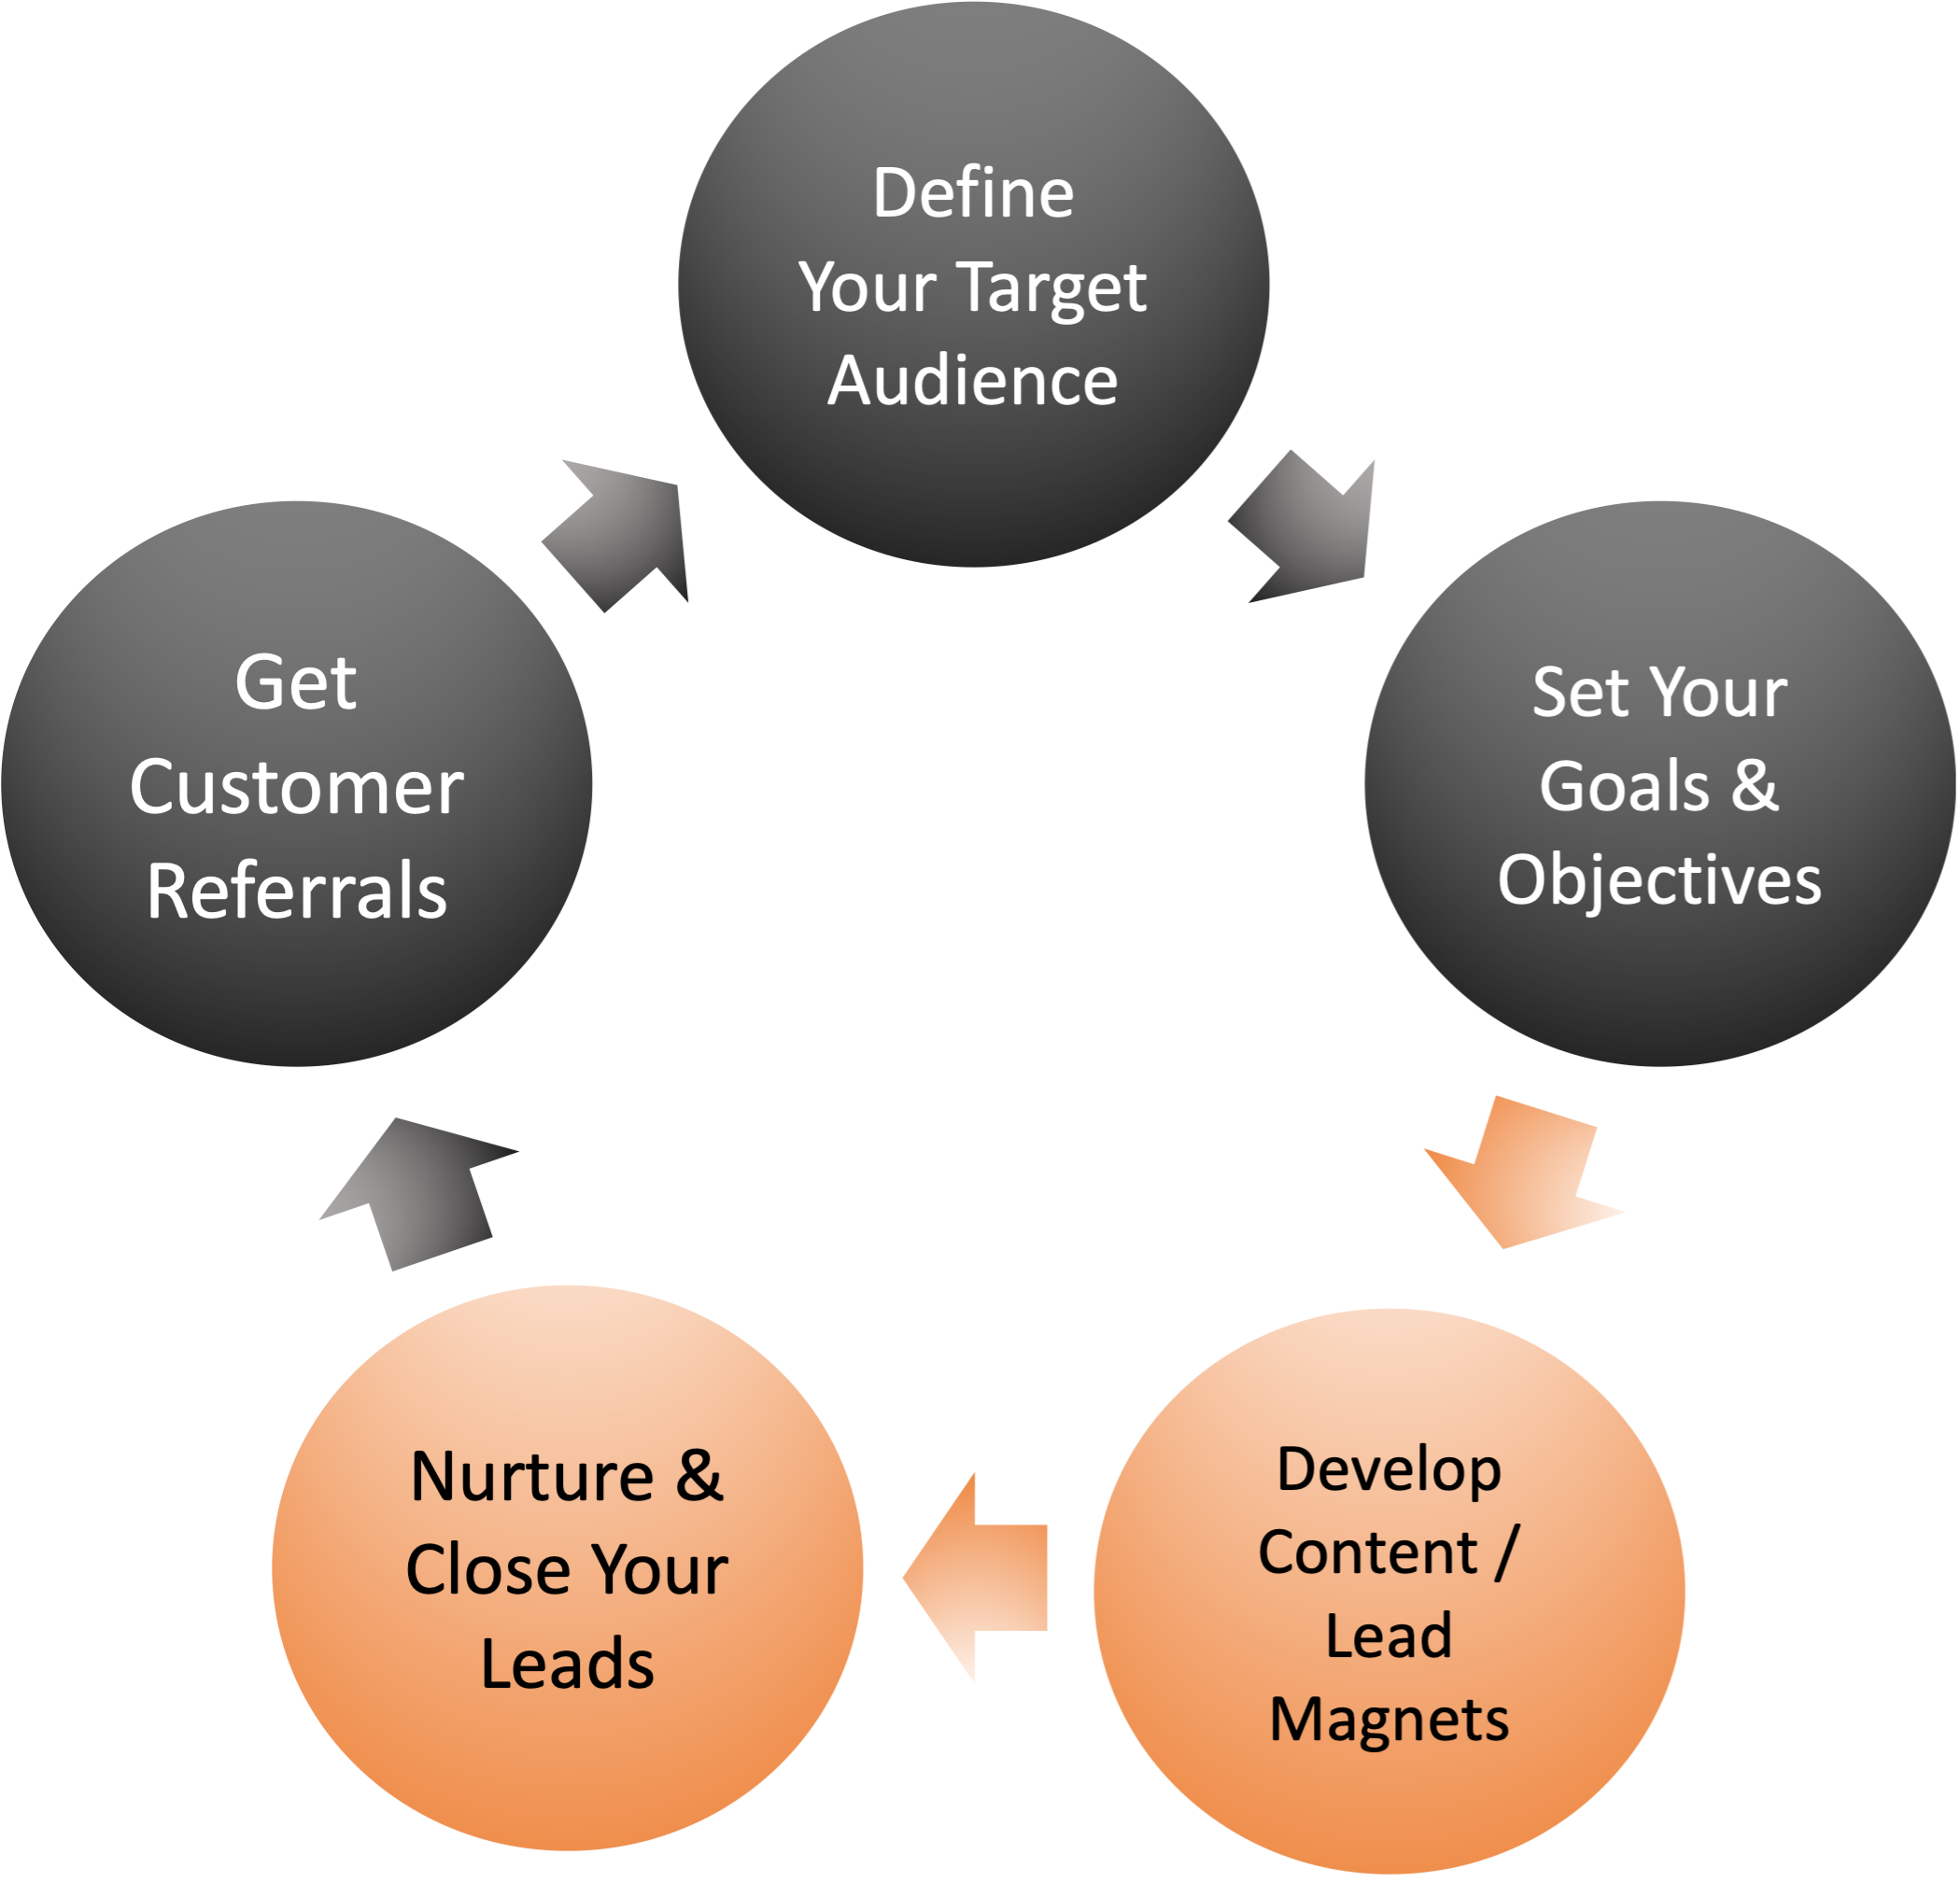 Define your target audience, set your goals & objectives, develop content/lead magnets, nuture & close your leads, get customer referrals.